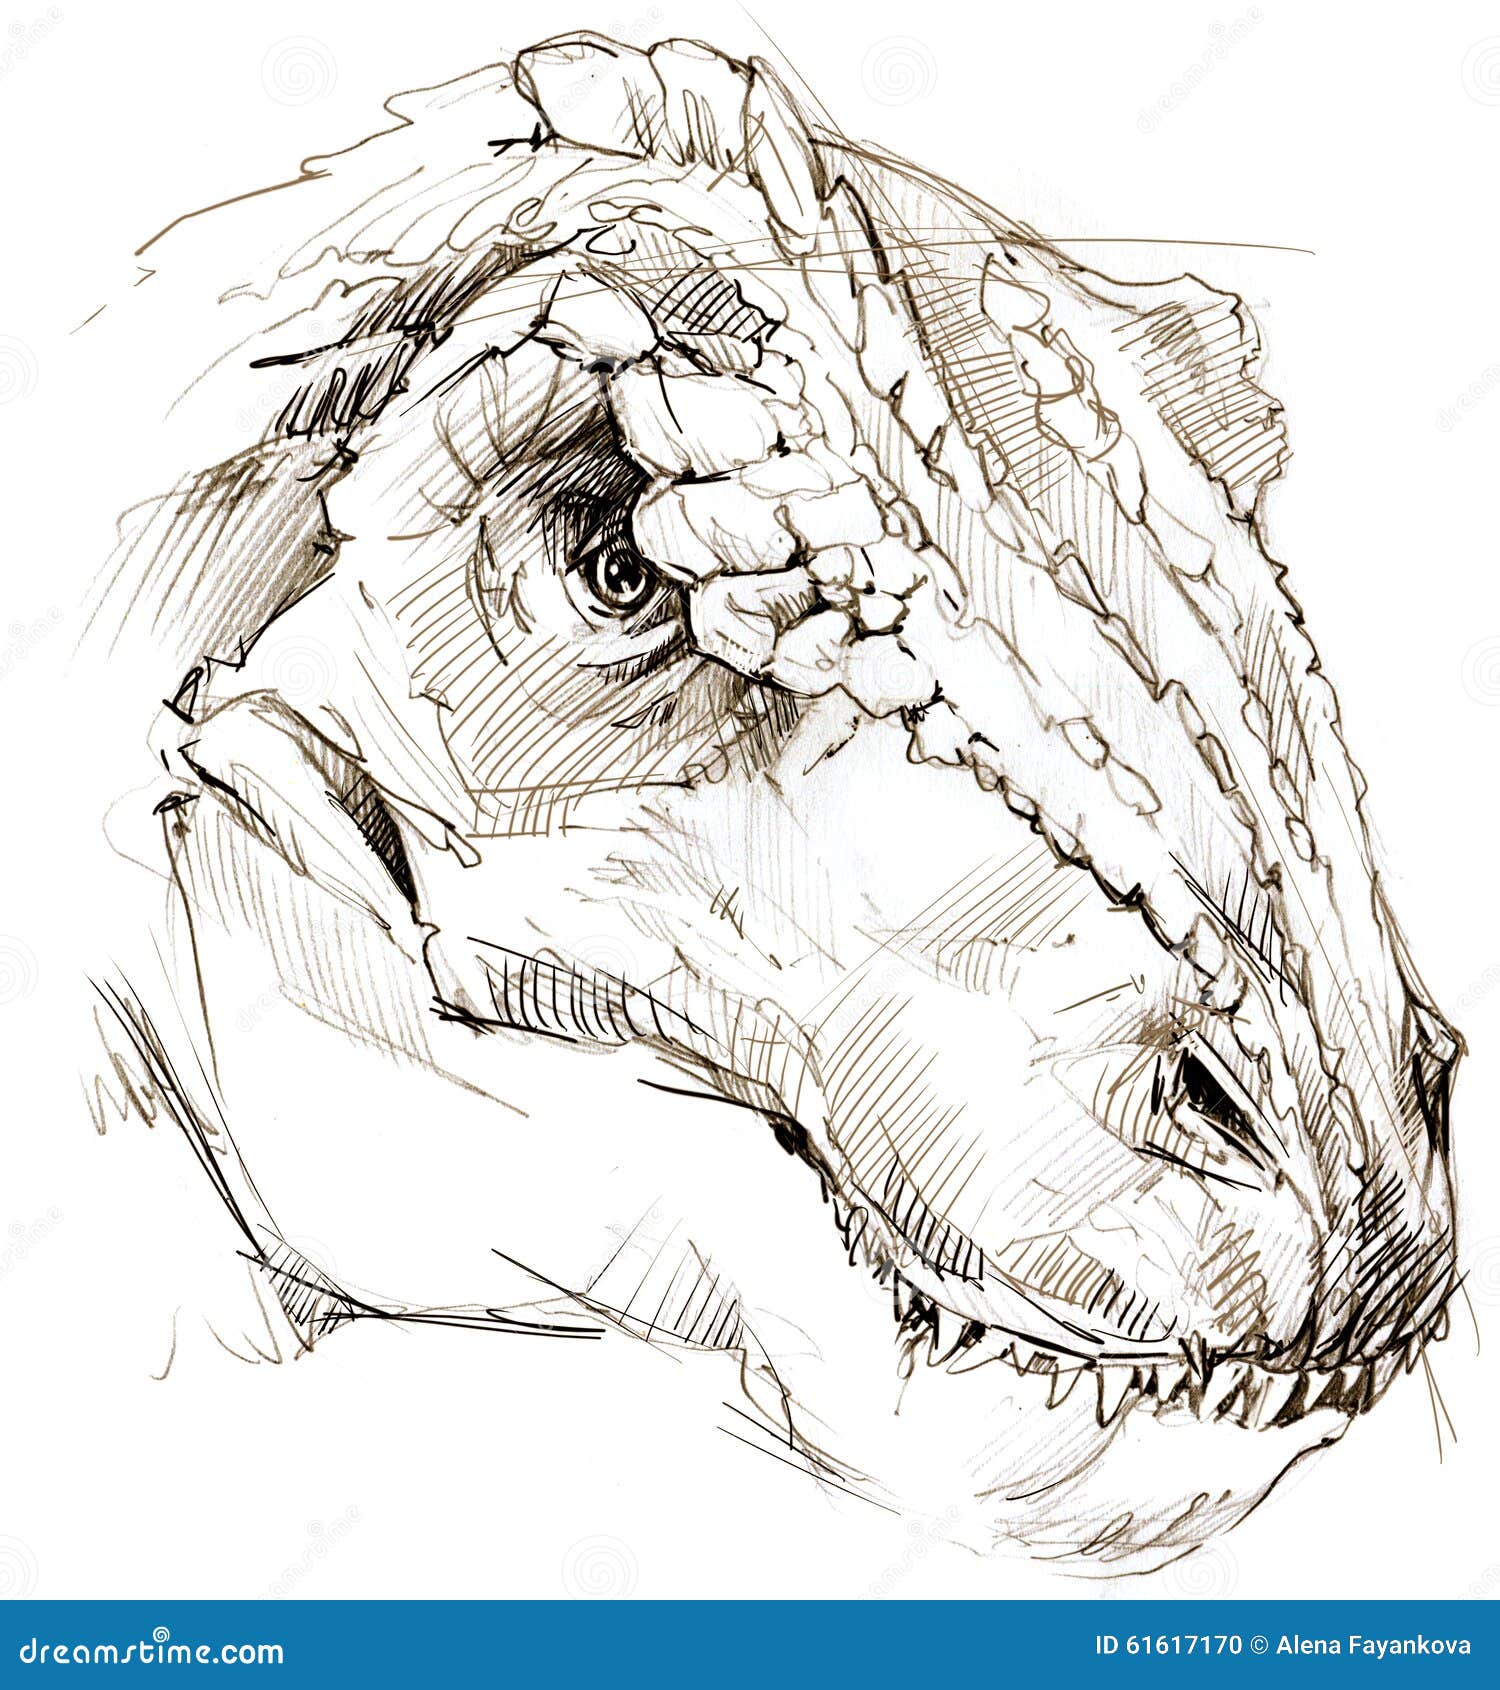 pencil drawing of triceratops | Ummmm...had a childhood dino… | Flickr